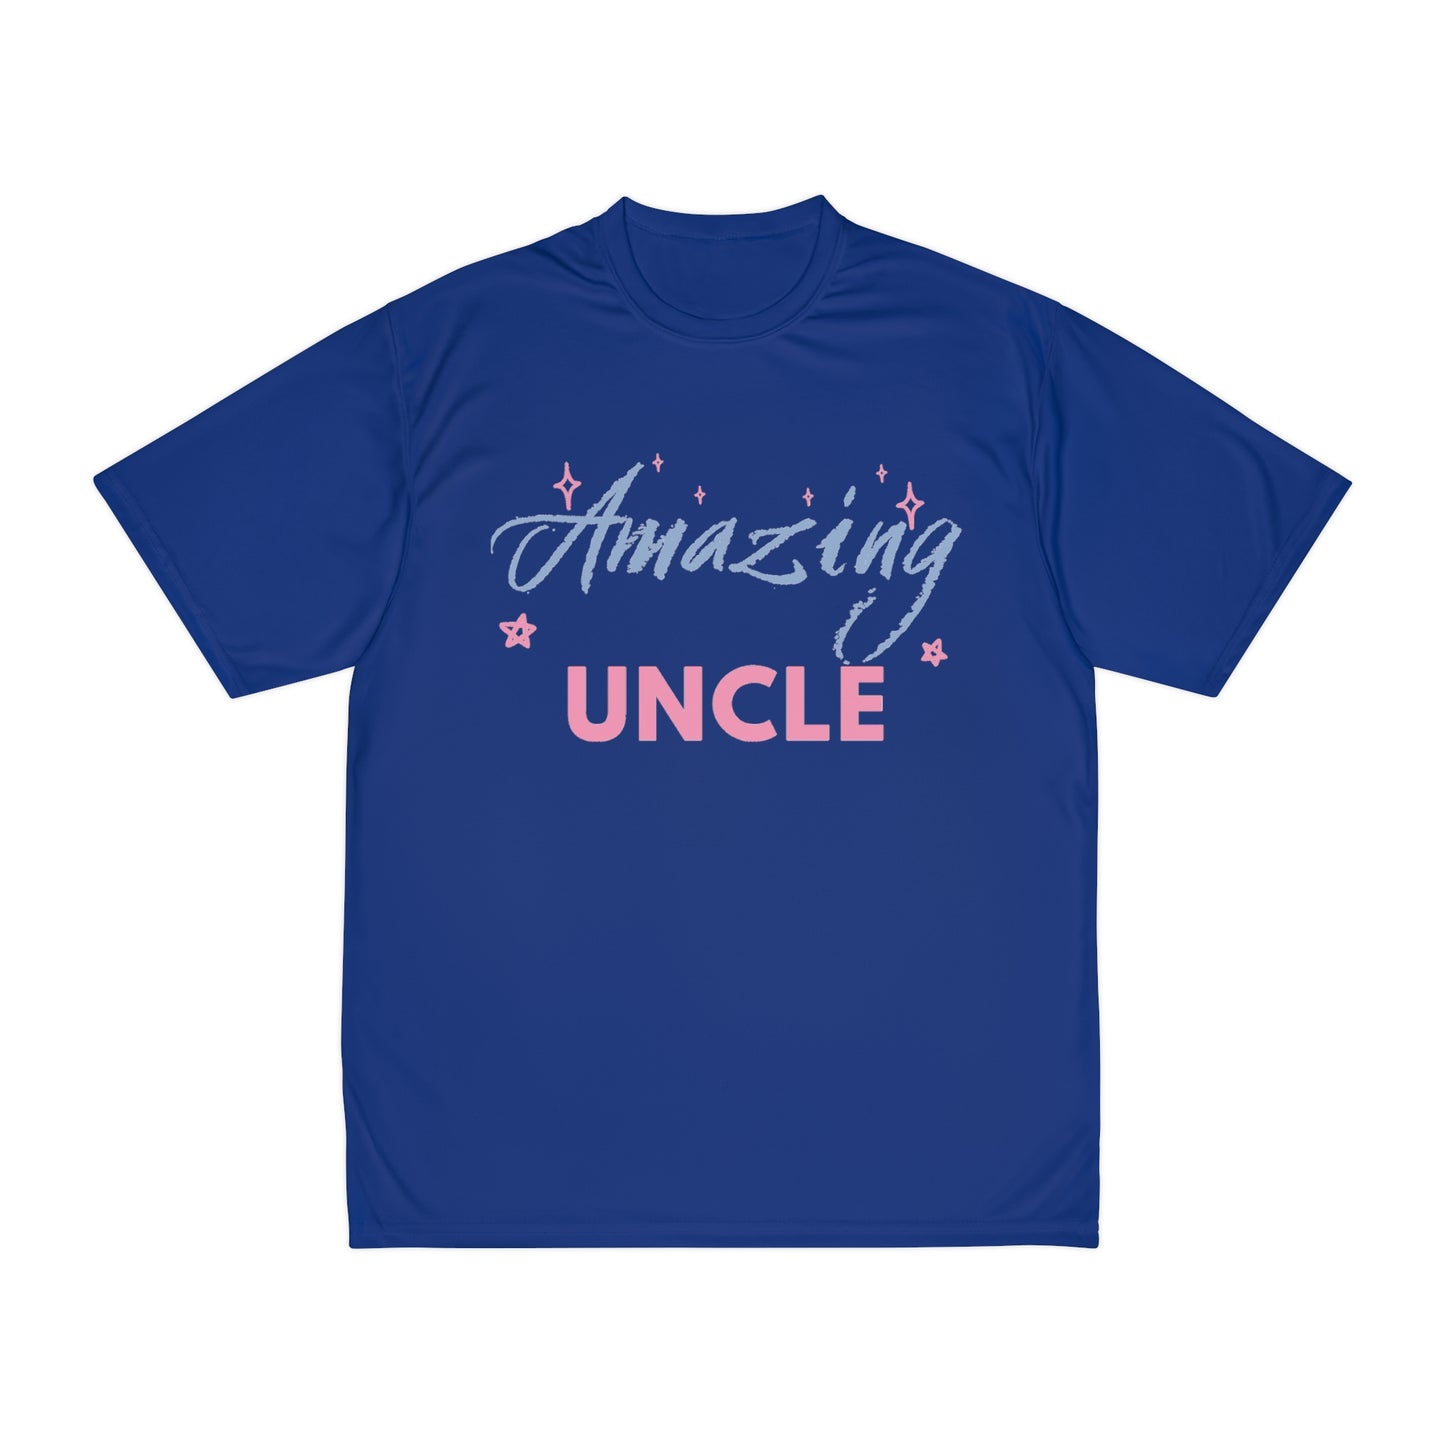 Amazing Uncle Performance T-shirt, Men's Active Apparel, Comfortable Workout Tee, Athletic Clothing, Cool Gym Shirt